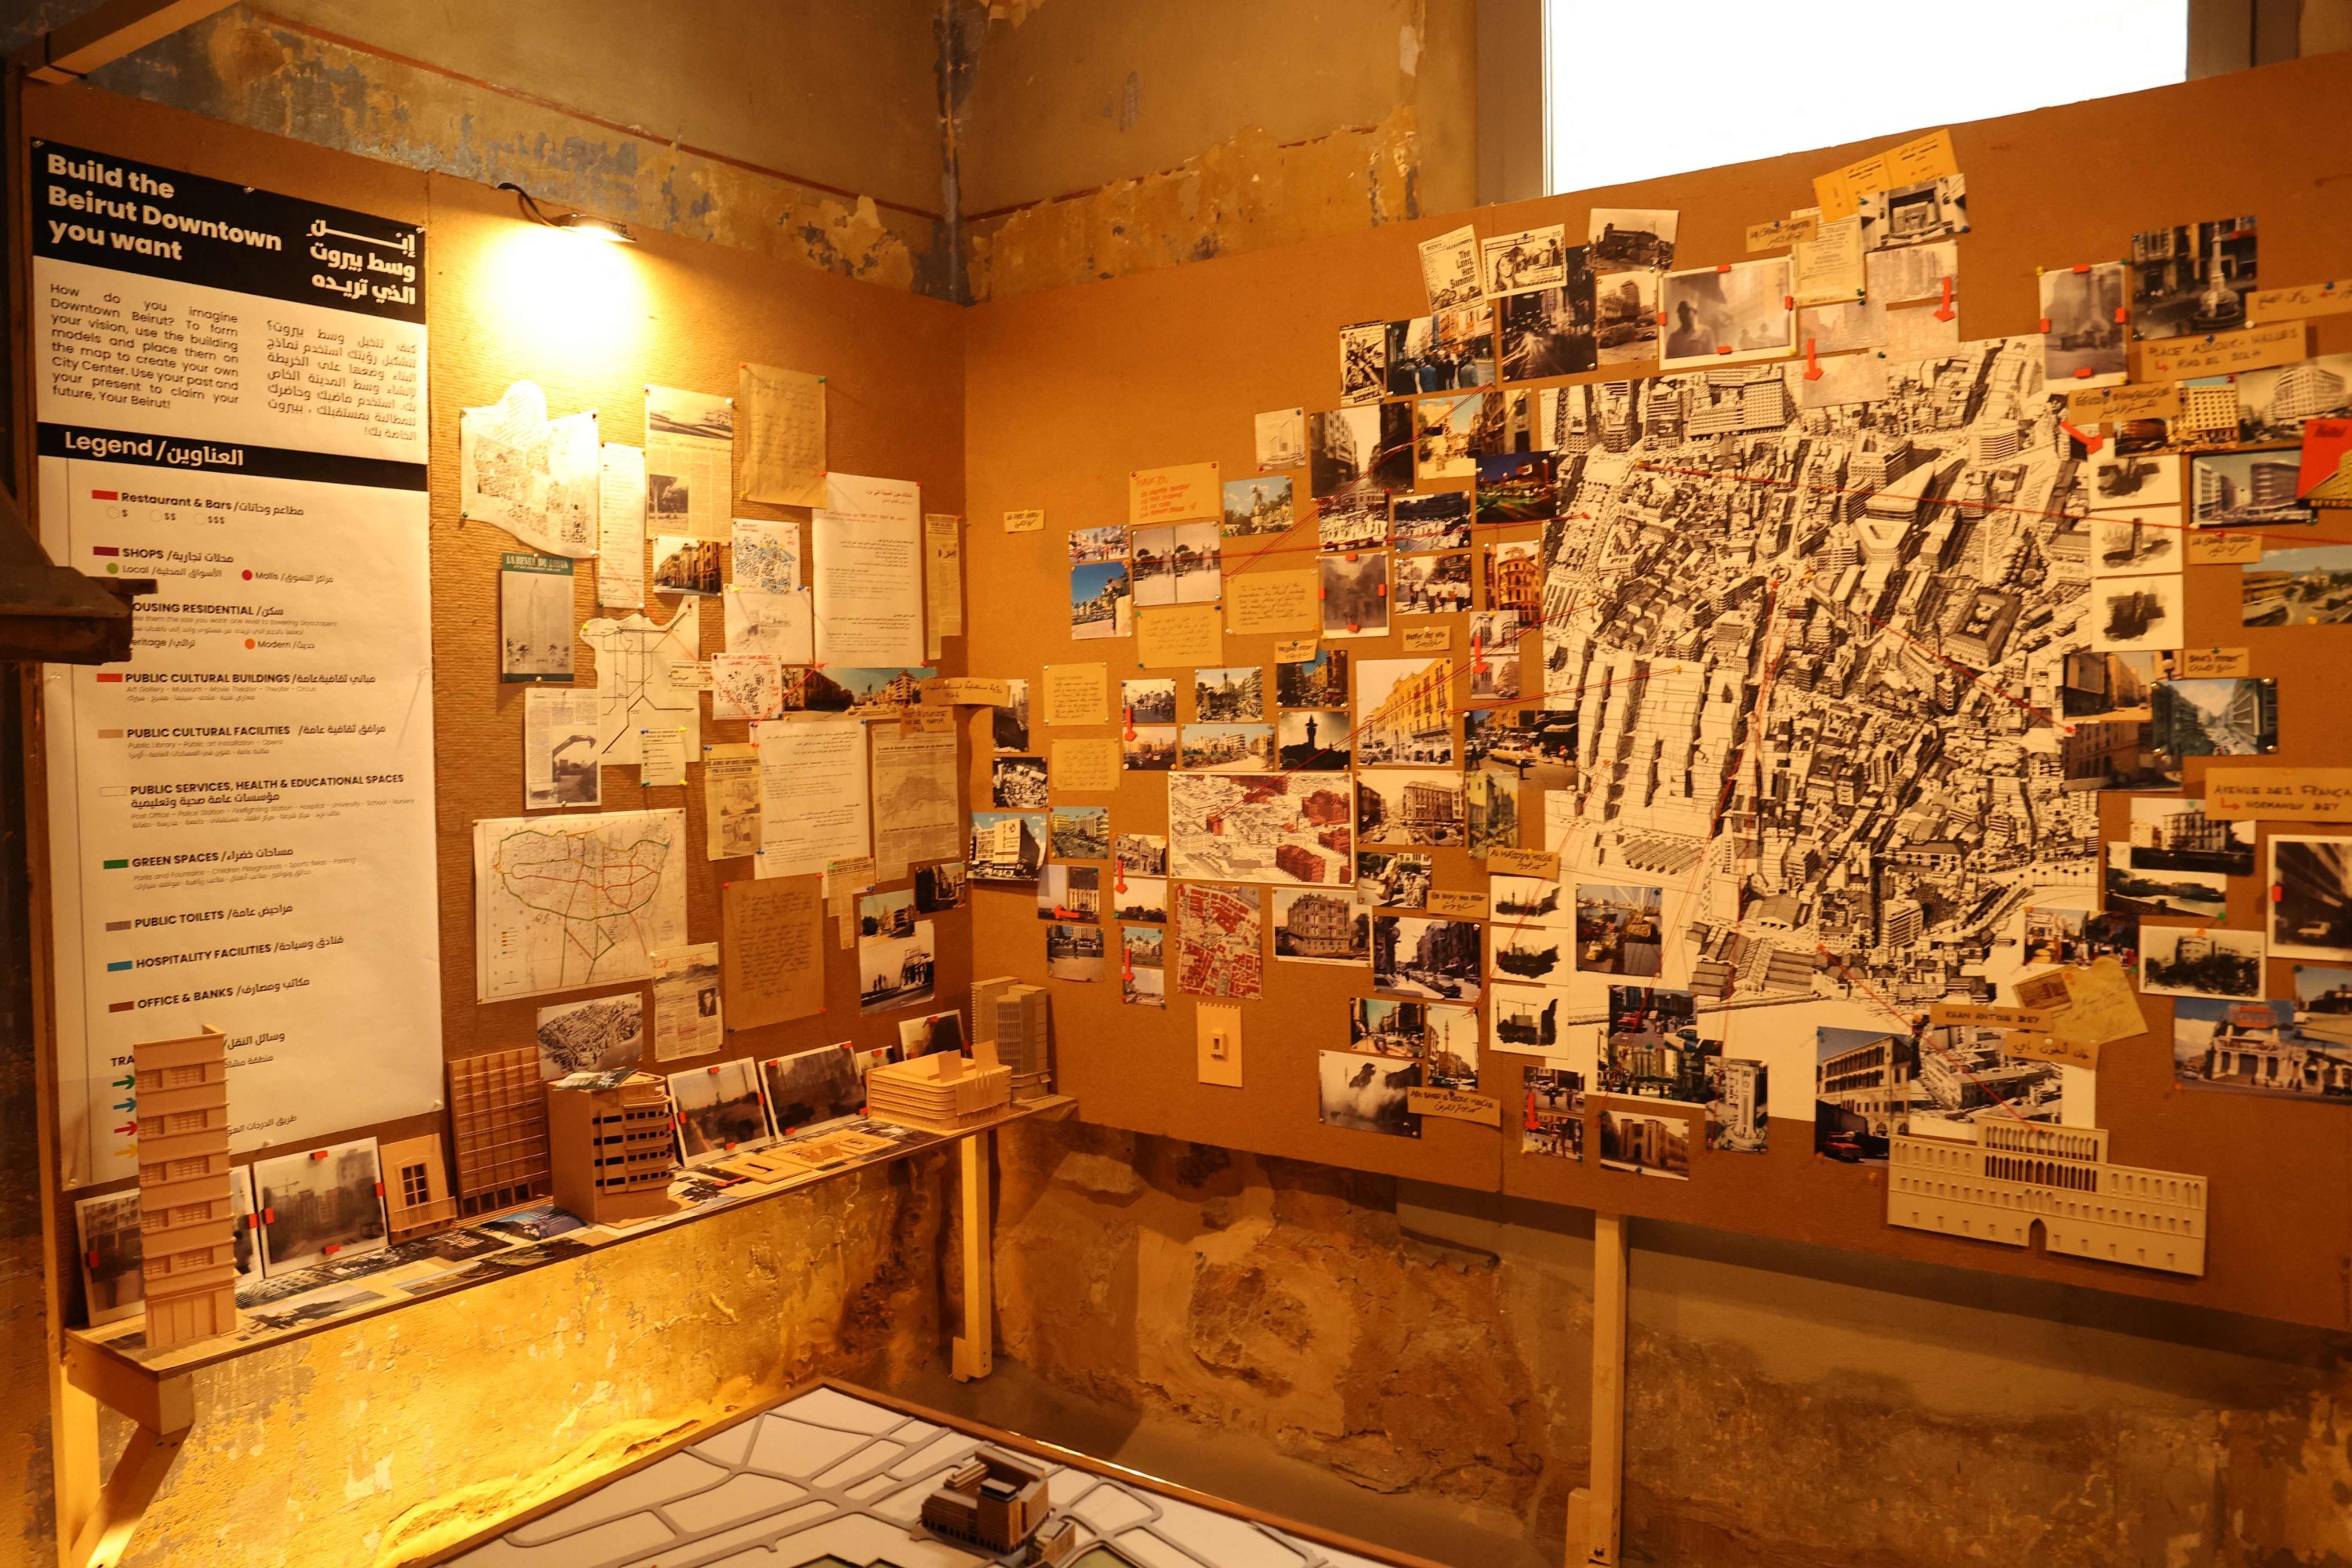 This picture shows an art installation, as part of an exhibition titled 